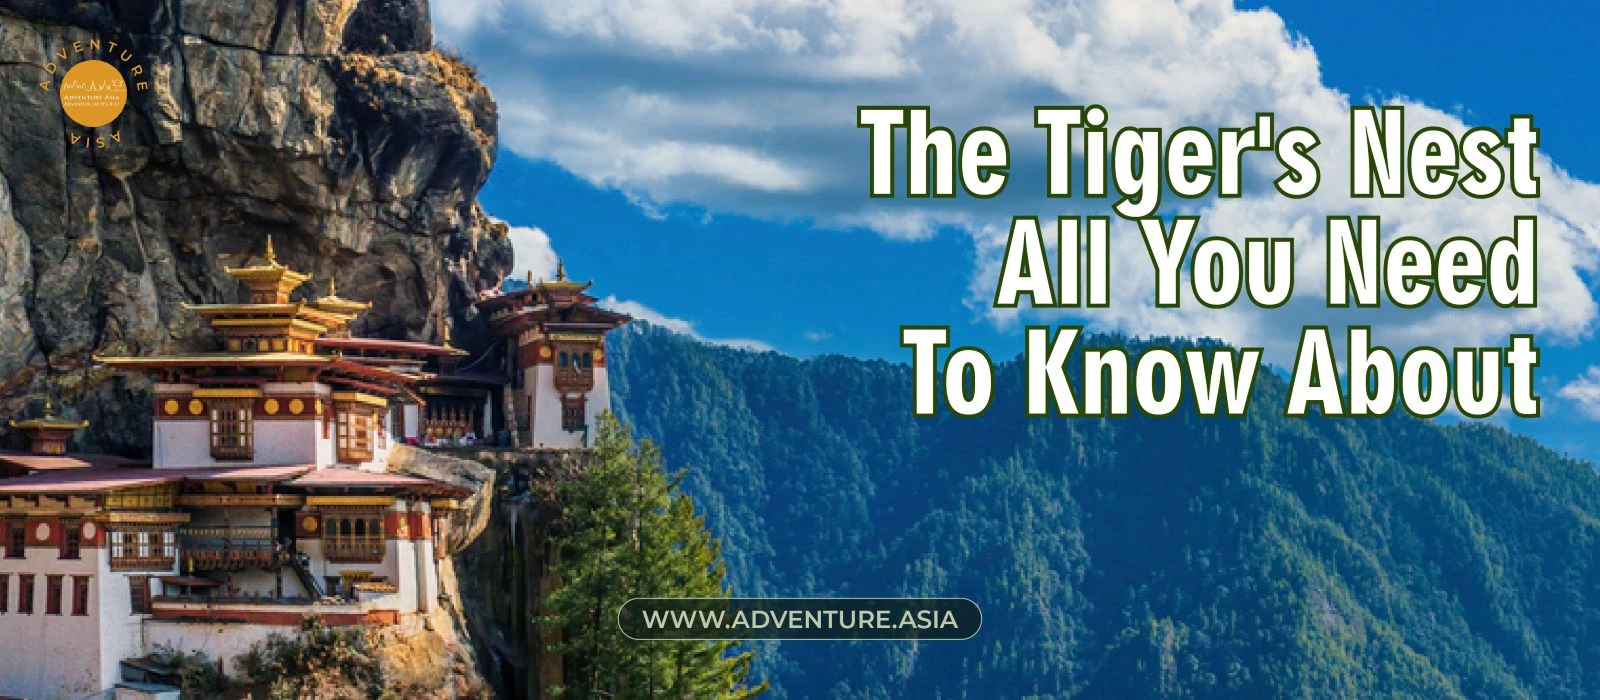 The Tiger’s Nest in Bhutan - One of the best thing to do